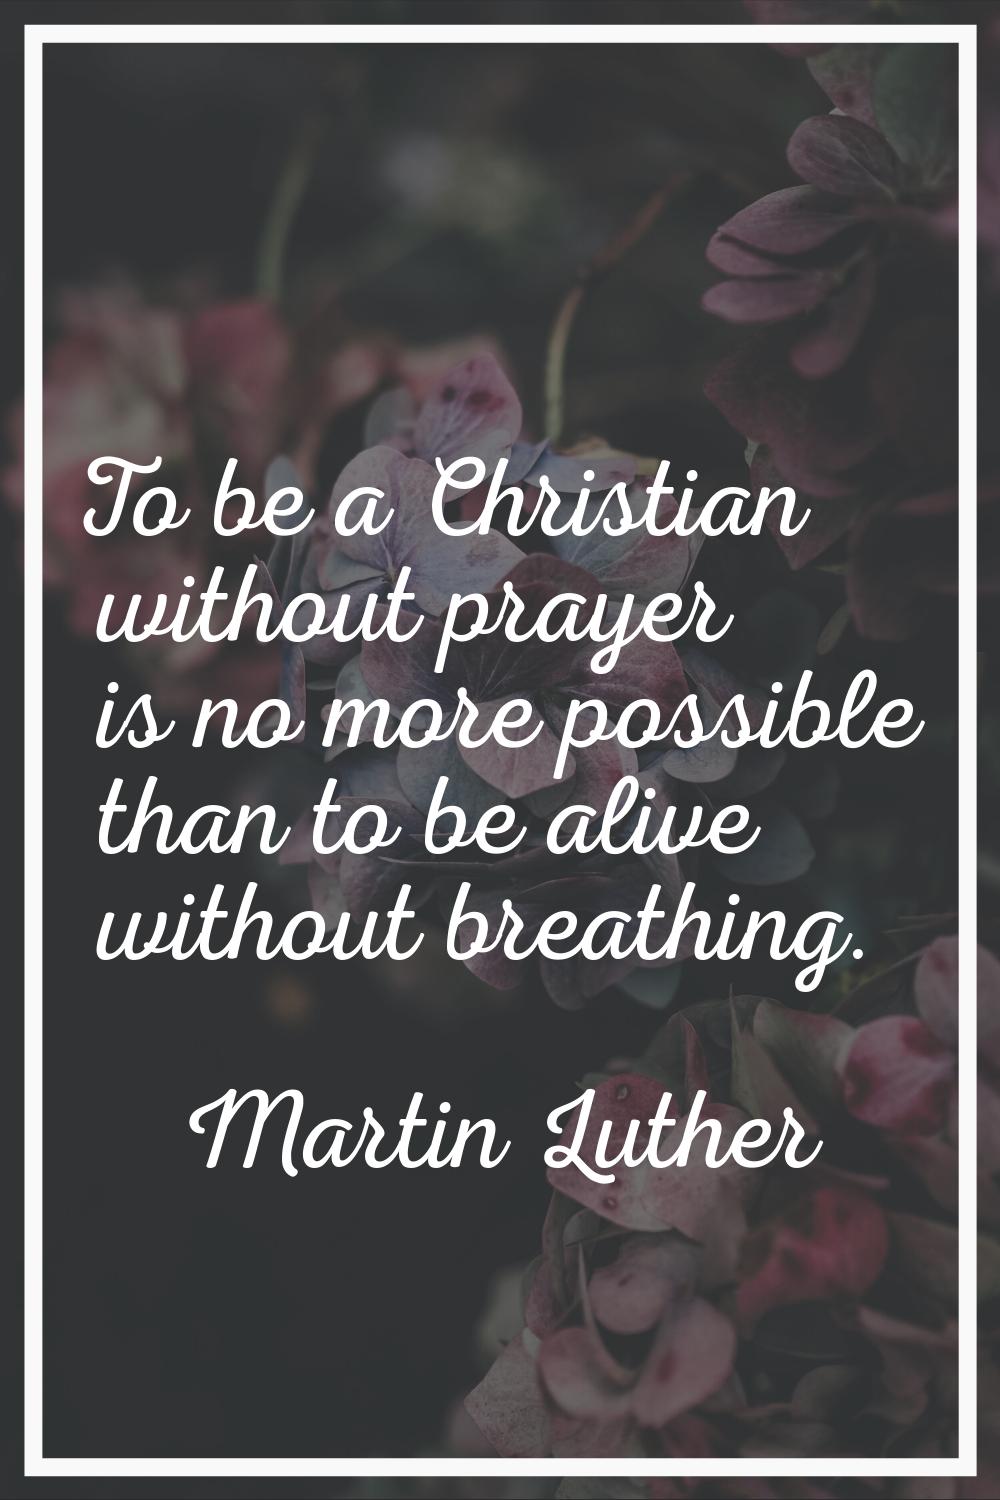 To be a Christian without prayer is no more possible than to be alive without breathing.